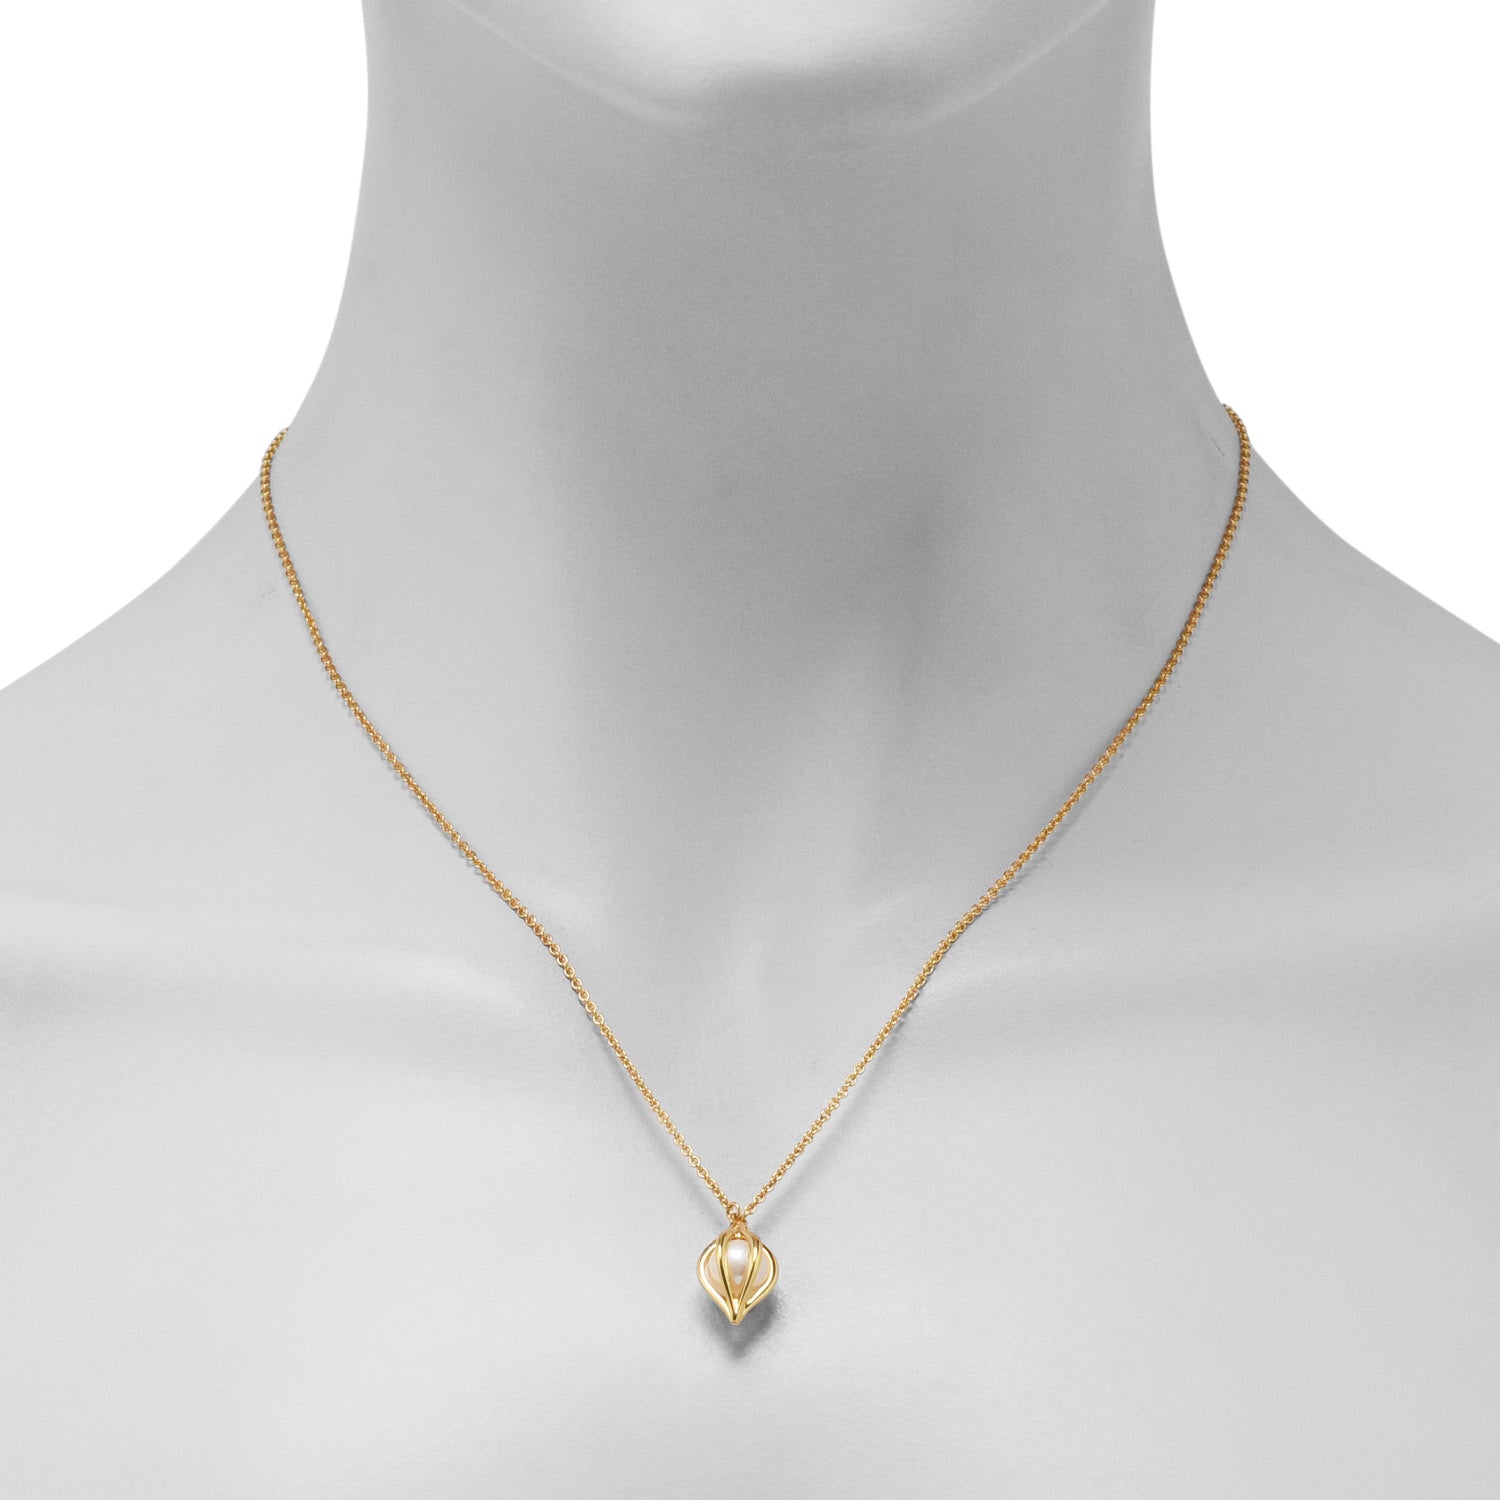 Mastoloni Freshwater Pearl Necklace in 14kt Yellow Gold